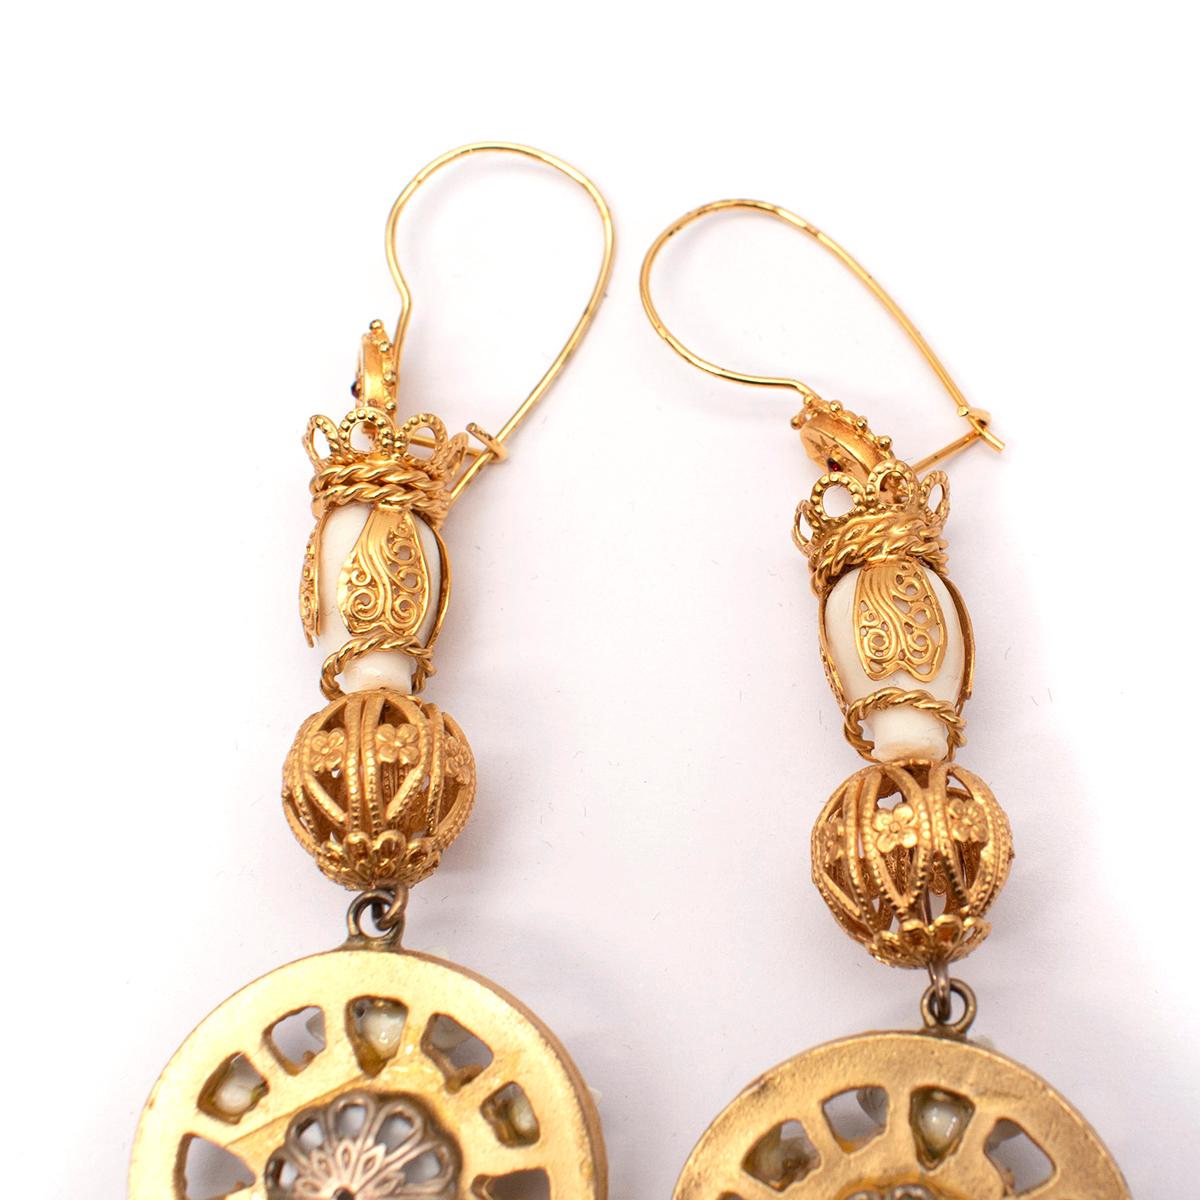 Dolce & Gabbana Gold Pupi Doll & Cartwheel Earrings 

- Articulated gold-tone drop earrings featuring a ceramic pupi doll, cartwheel and floral motifs 
- Earwire, for pierced ears

Materials:
Gold Brass 
Resin 
Crystal

Measurements:
12cm length